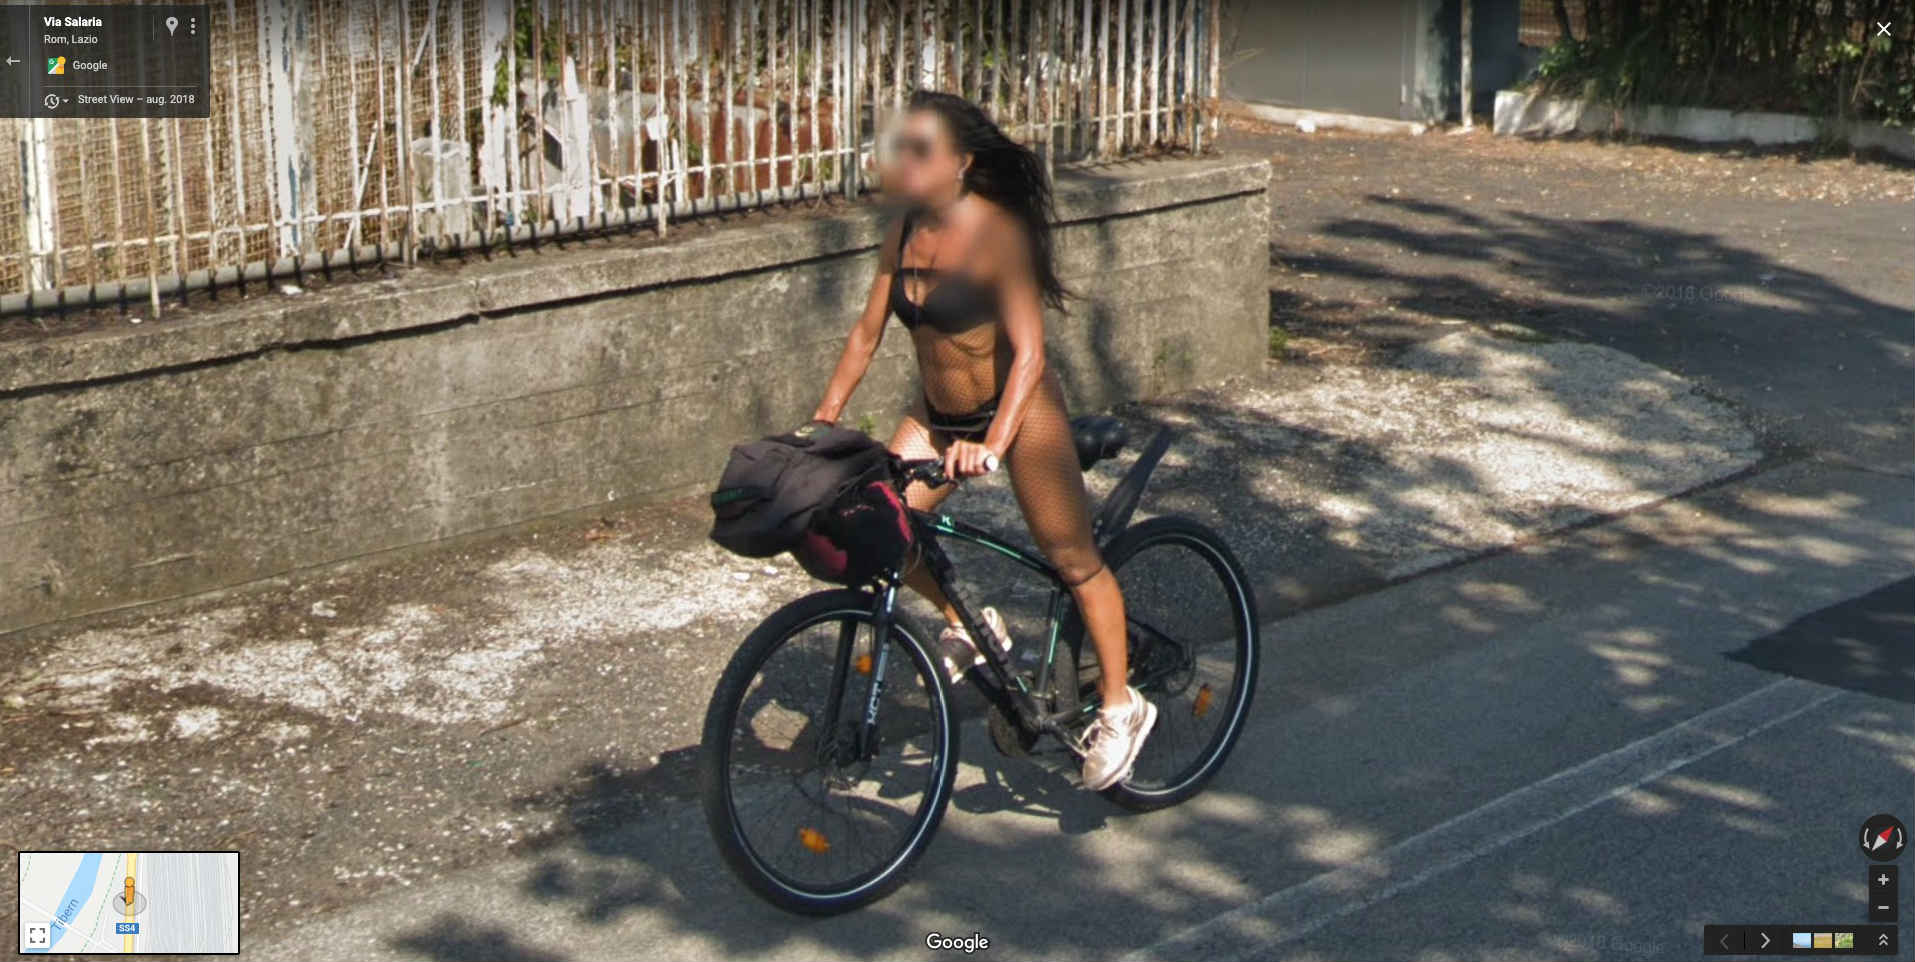 Experience a new way to discover sexy places with Google Maps Street View